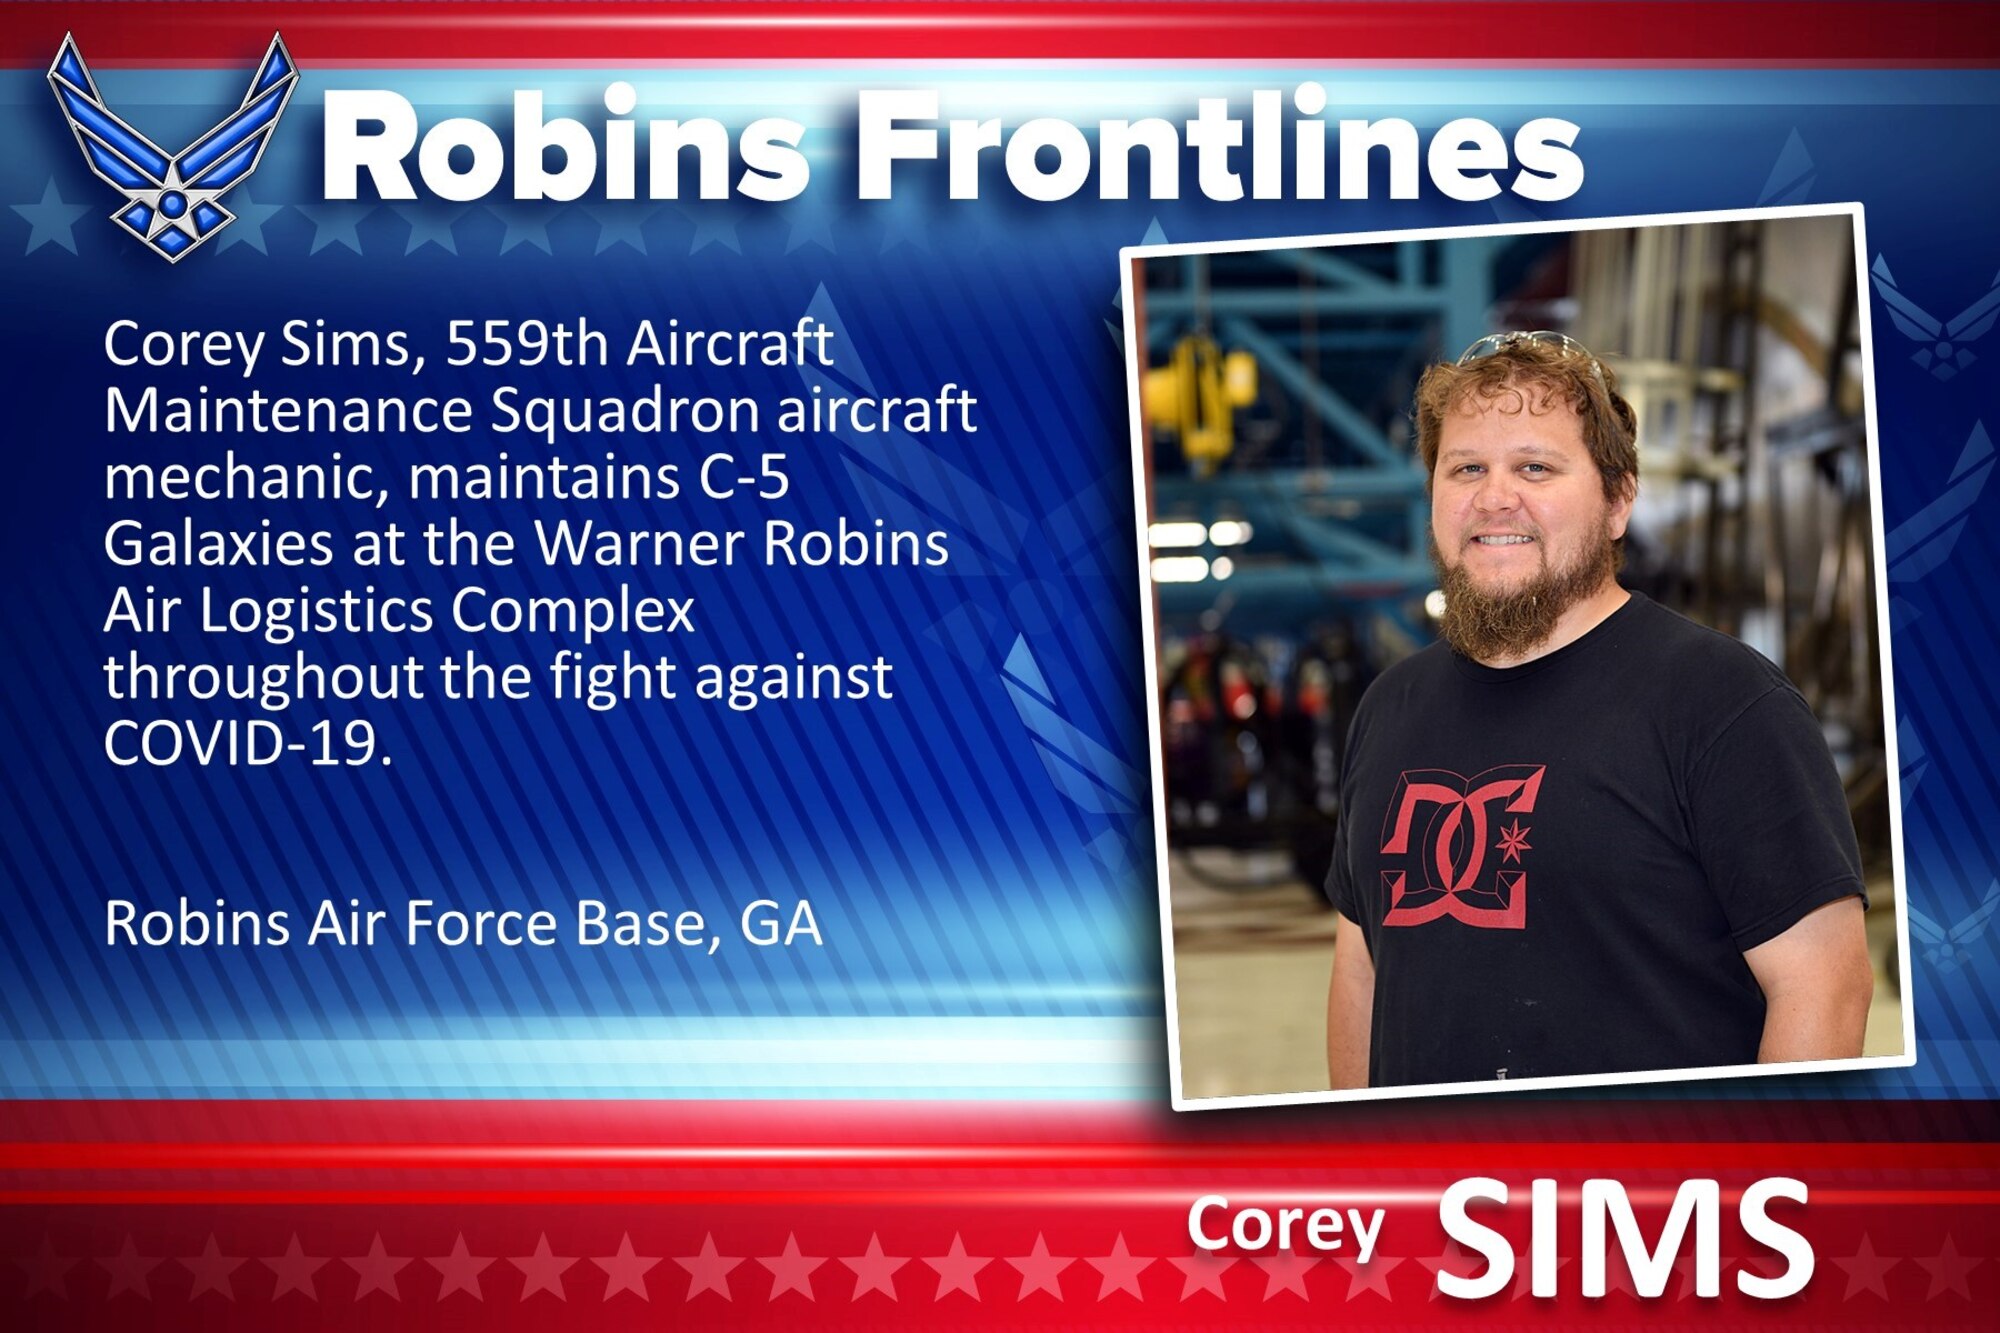 Robins Fronelines: Corey Sims